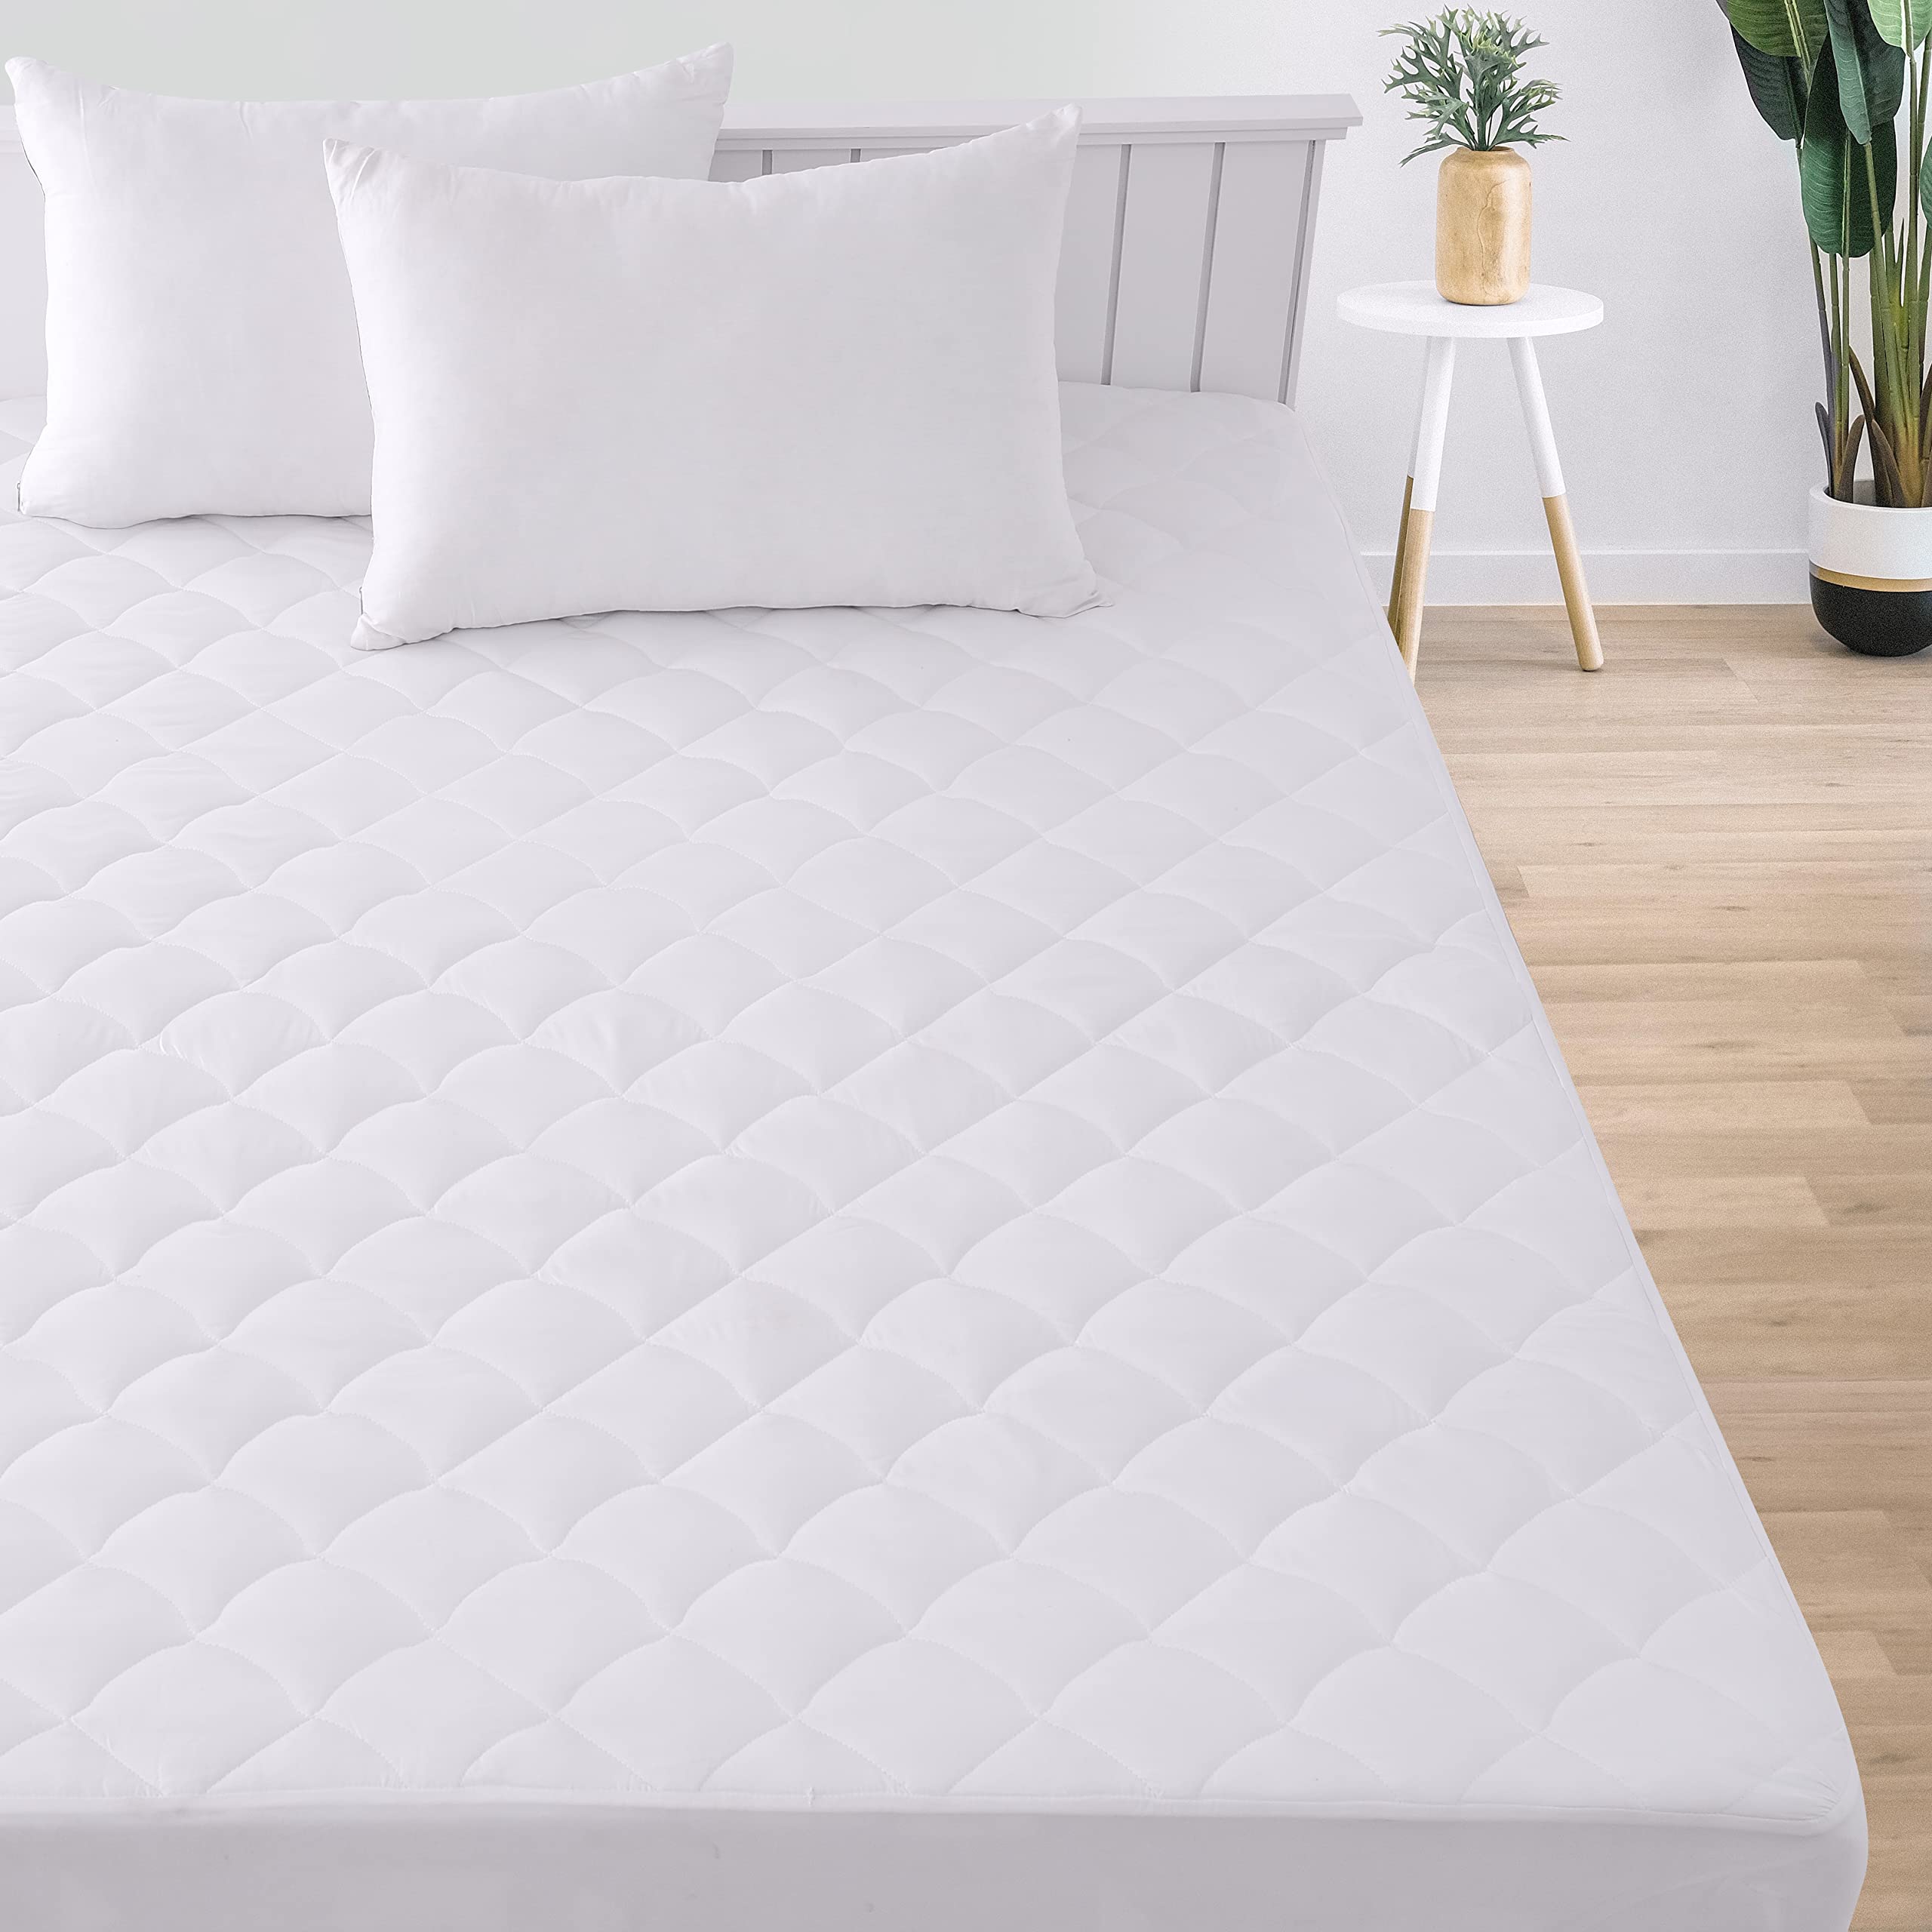 Book Cover Lux Decor Collection Mattress Pad - King Mattress Cover Stretches Up to 16 Inches -Full Size Mattress Topper Quilted Fitted Mattress Pad Deep Pocket - Comfortable, Breathable & Easy to Put on Mattress 1 King